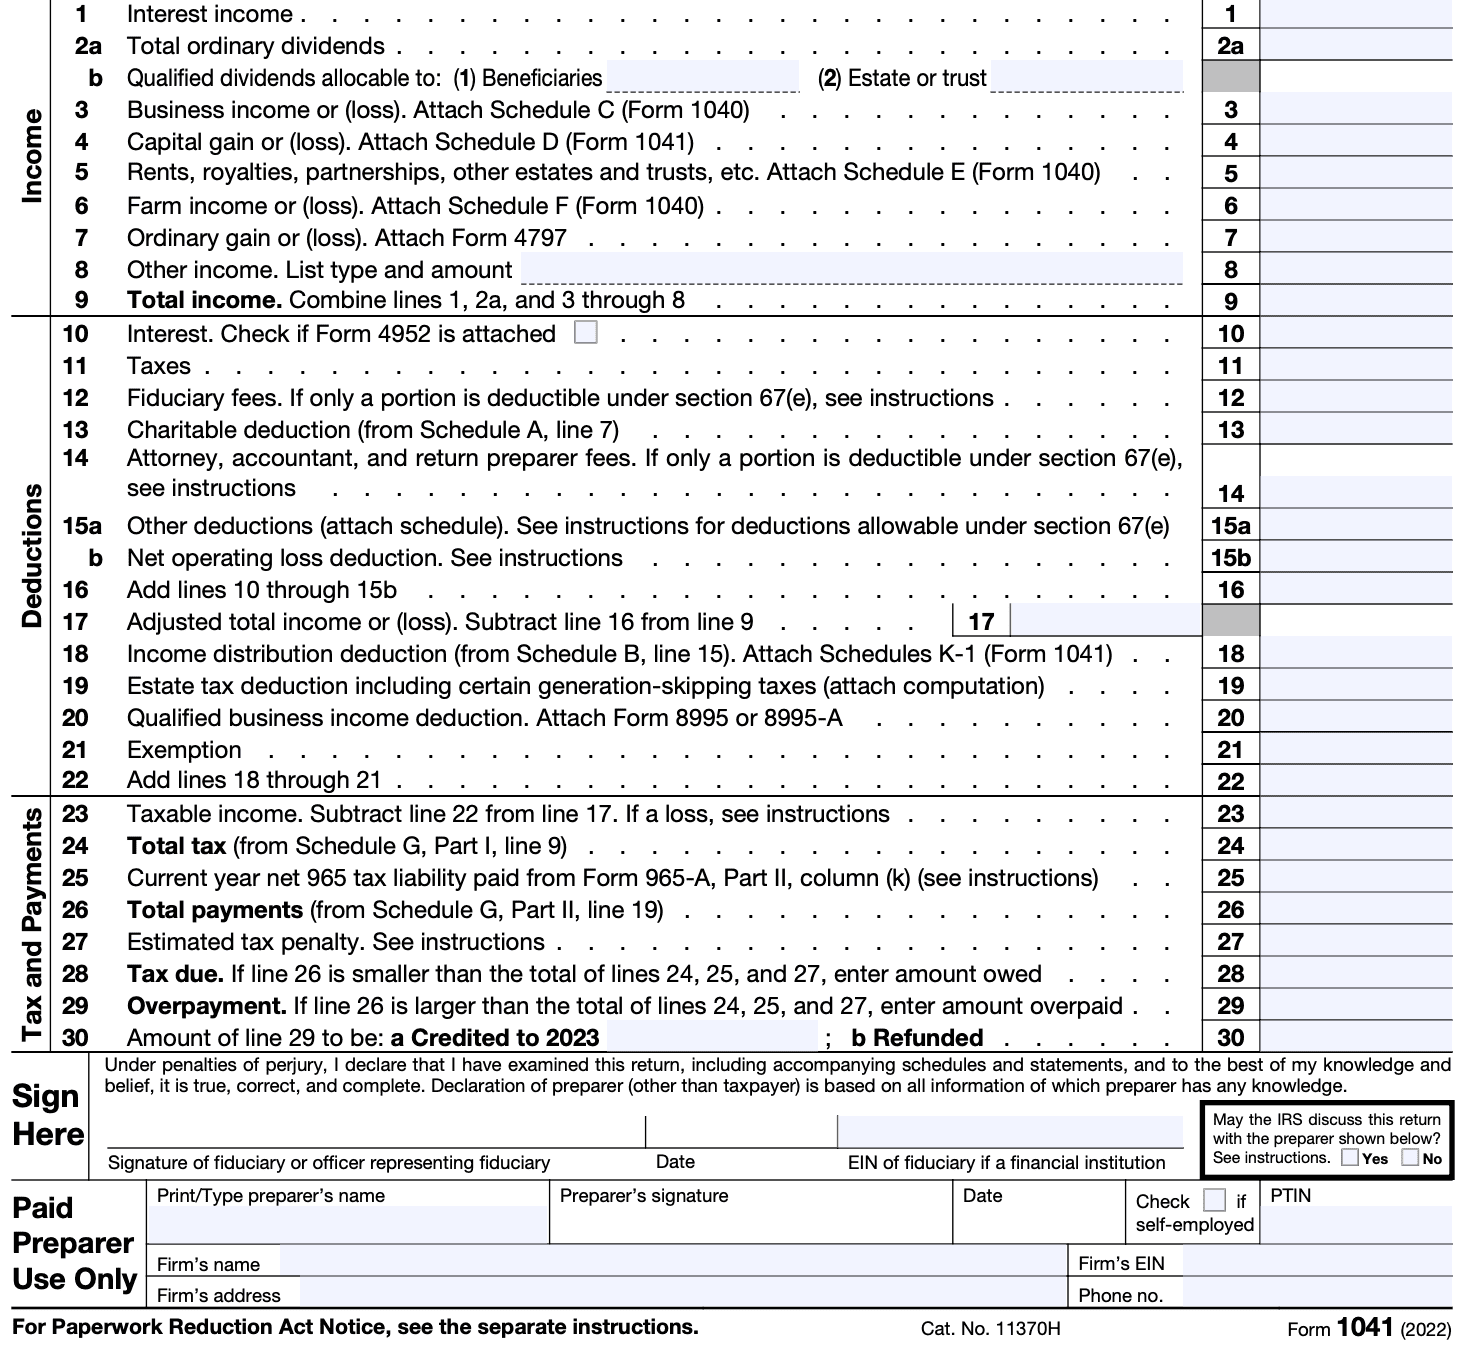 fill-out-form-1041.png